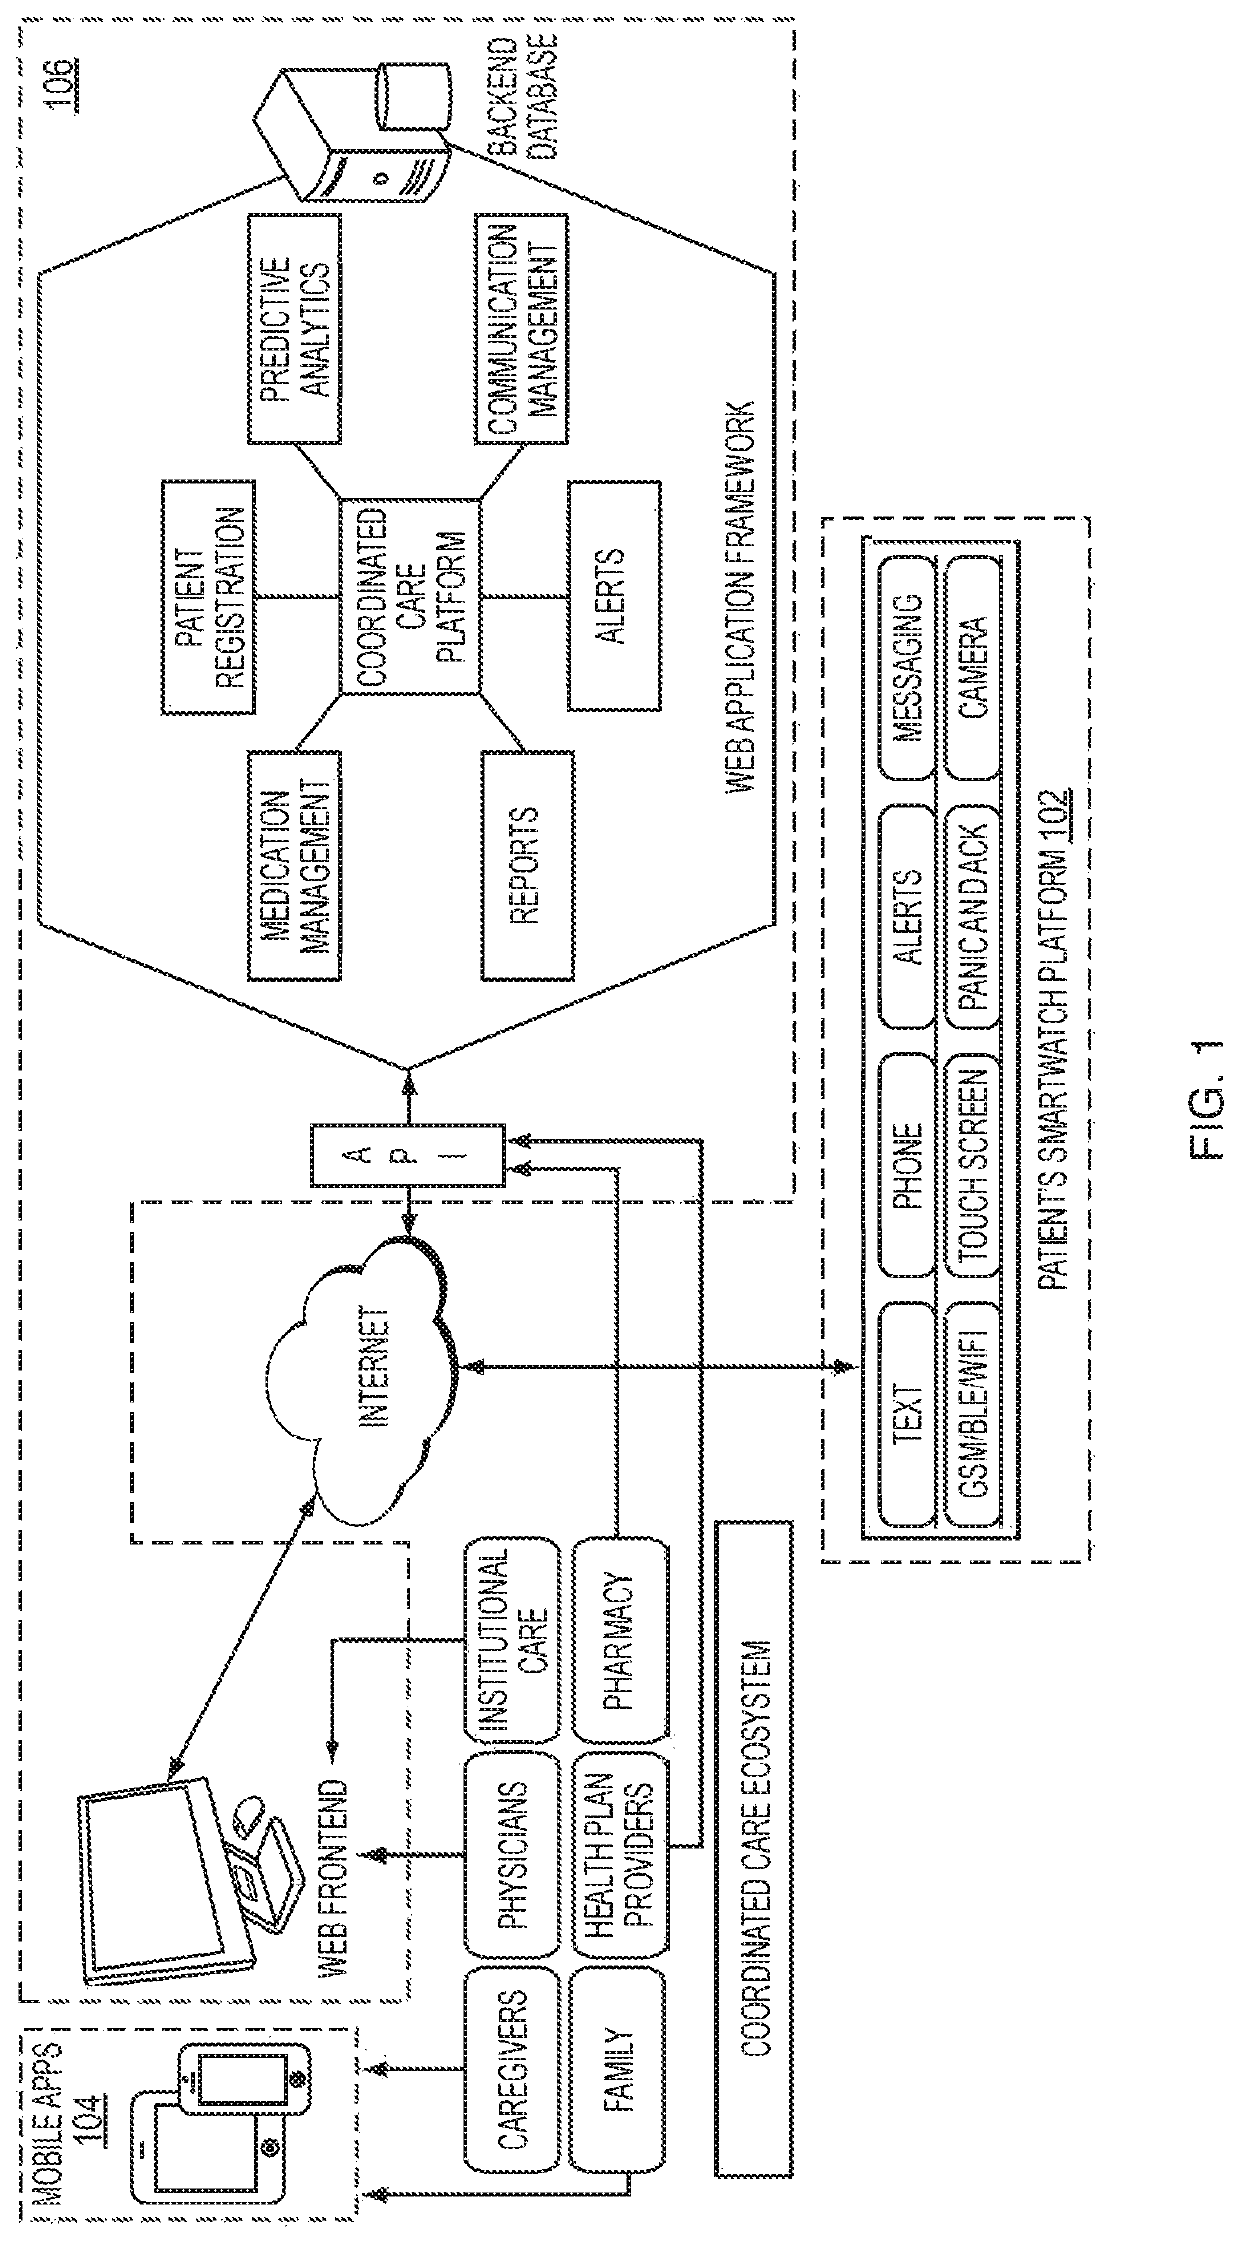 Medication adherence device and coordinated care platform